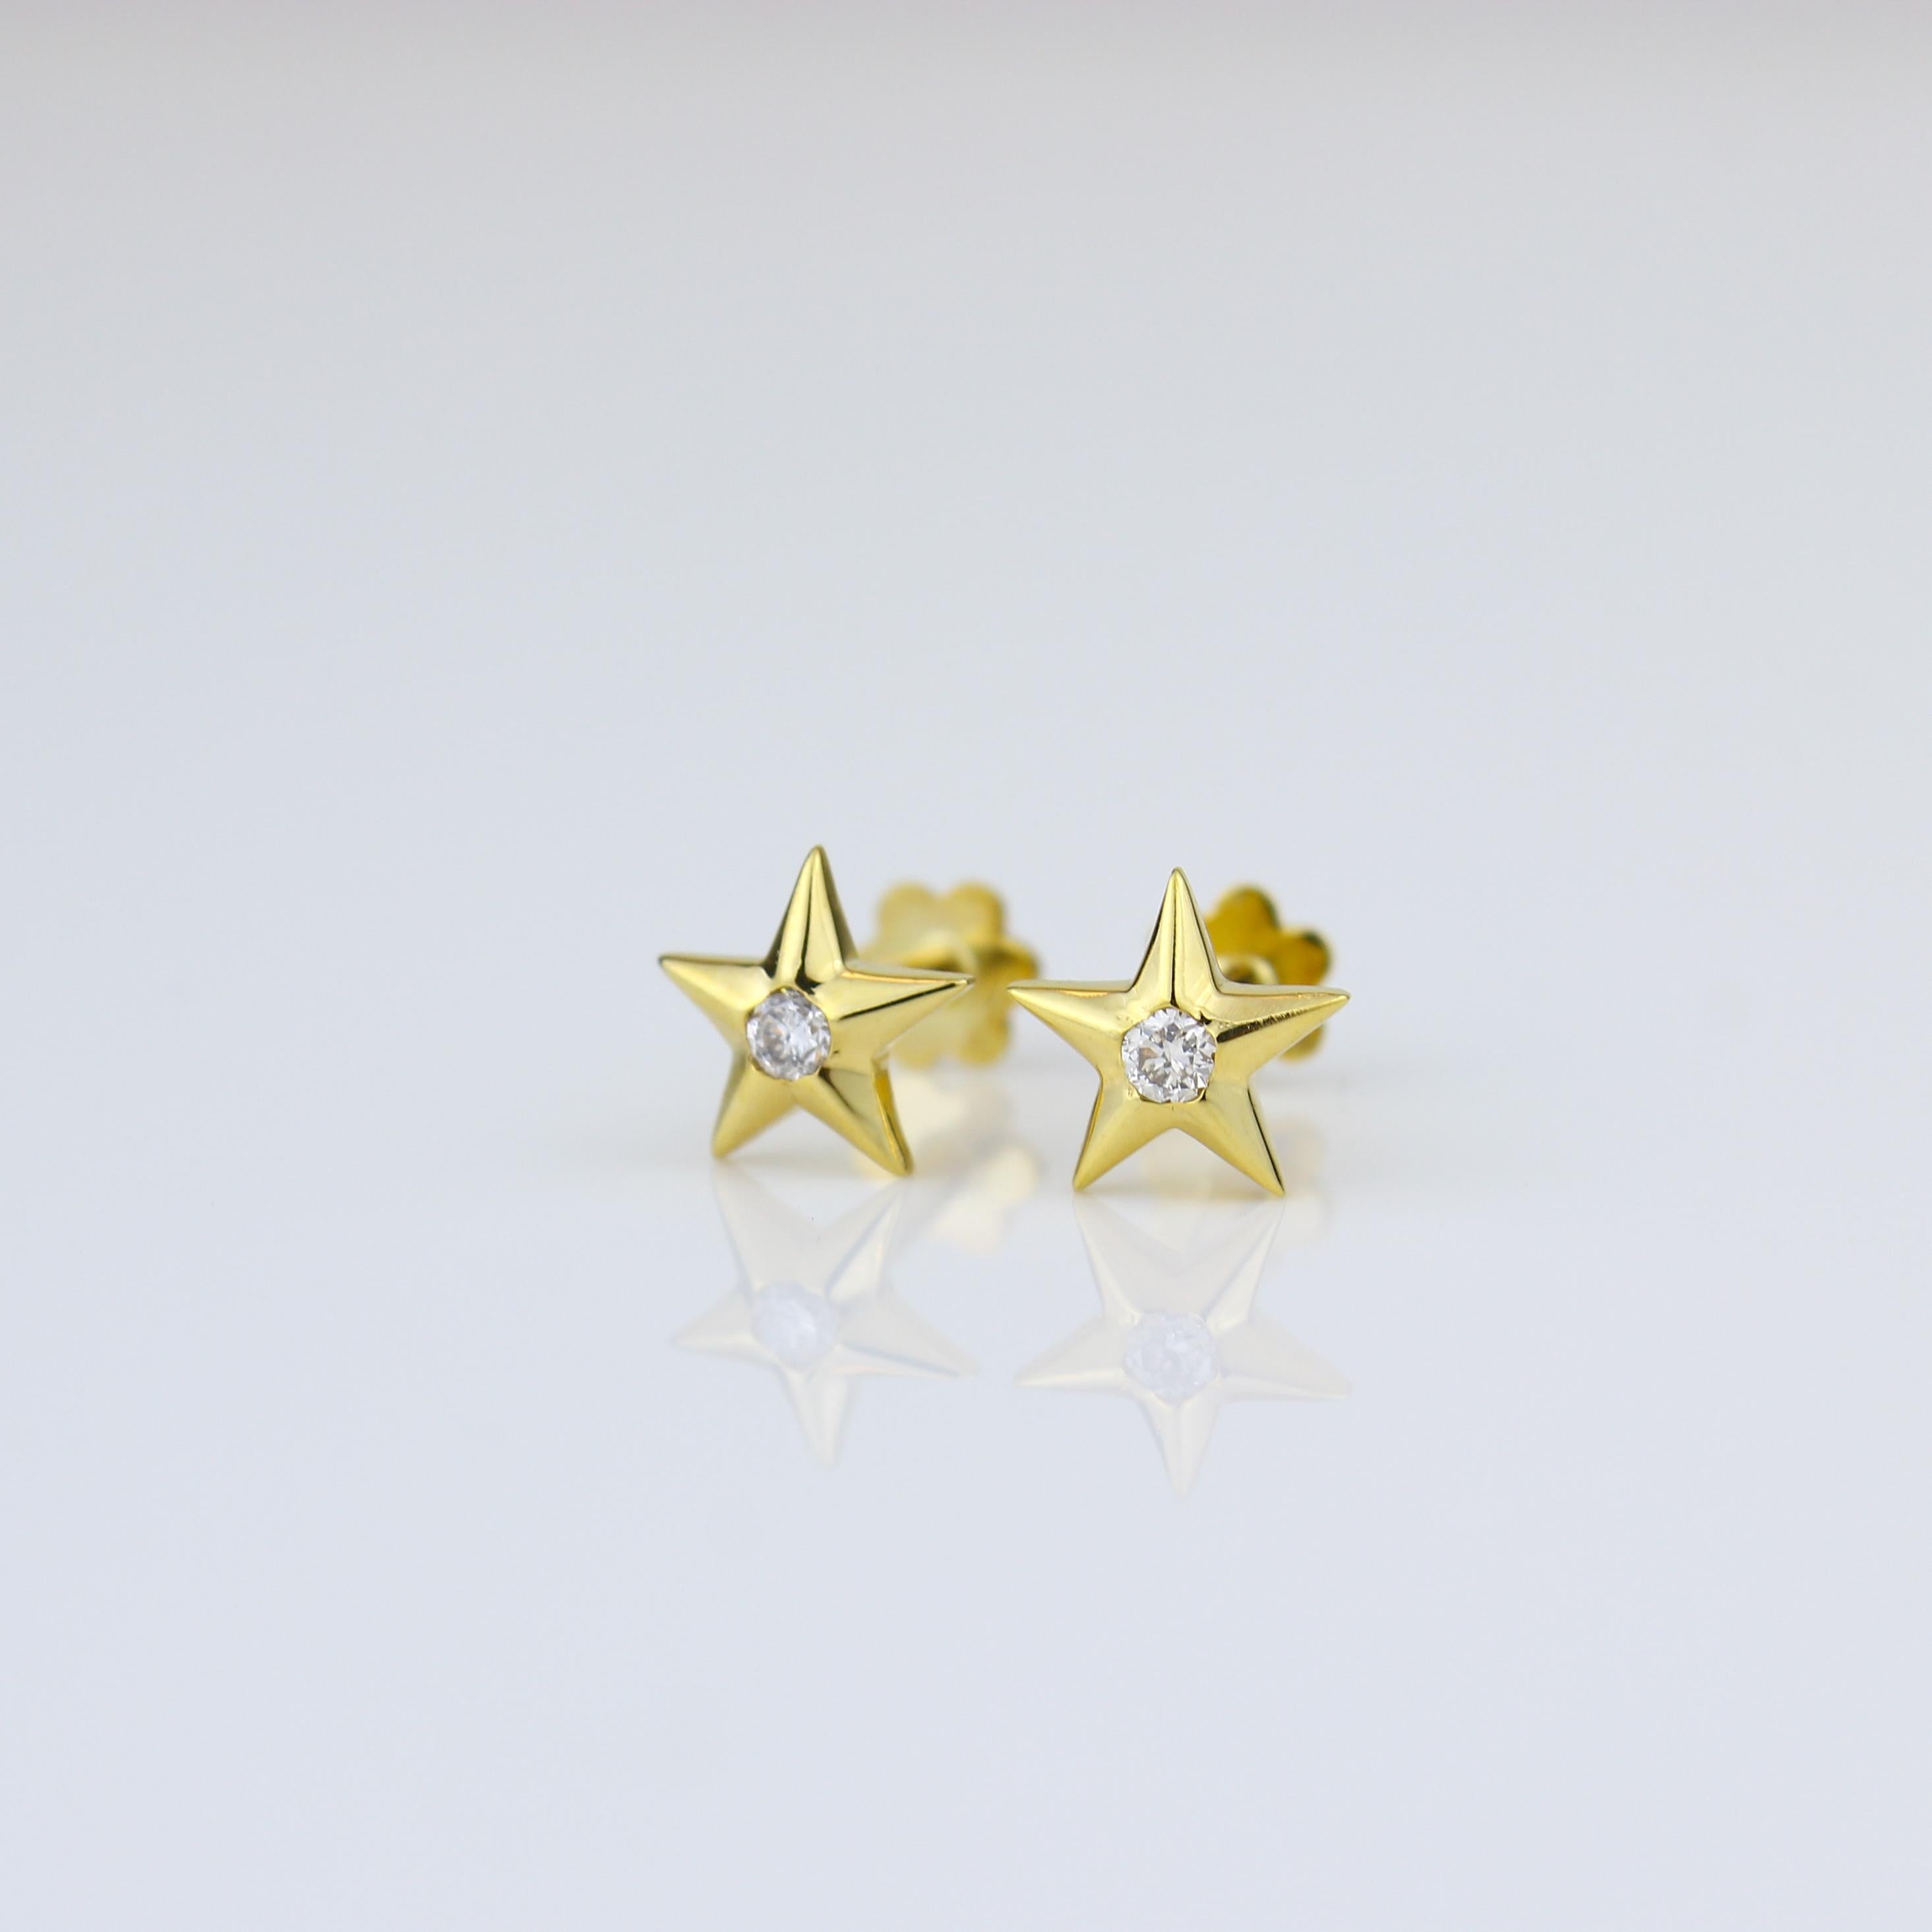 Twinkle and Shine with our Star Diamond Earrings, designed for Girls (Kids/Toddlers) in luxurious 18K Solid Gold. These enchanting earrings feature charming star motifs adorned with delicate diamonds, adding a touch of celestial elegance to your